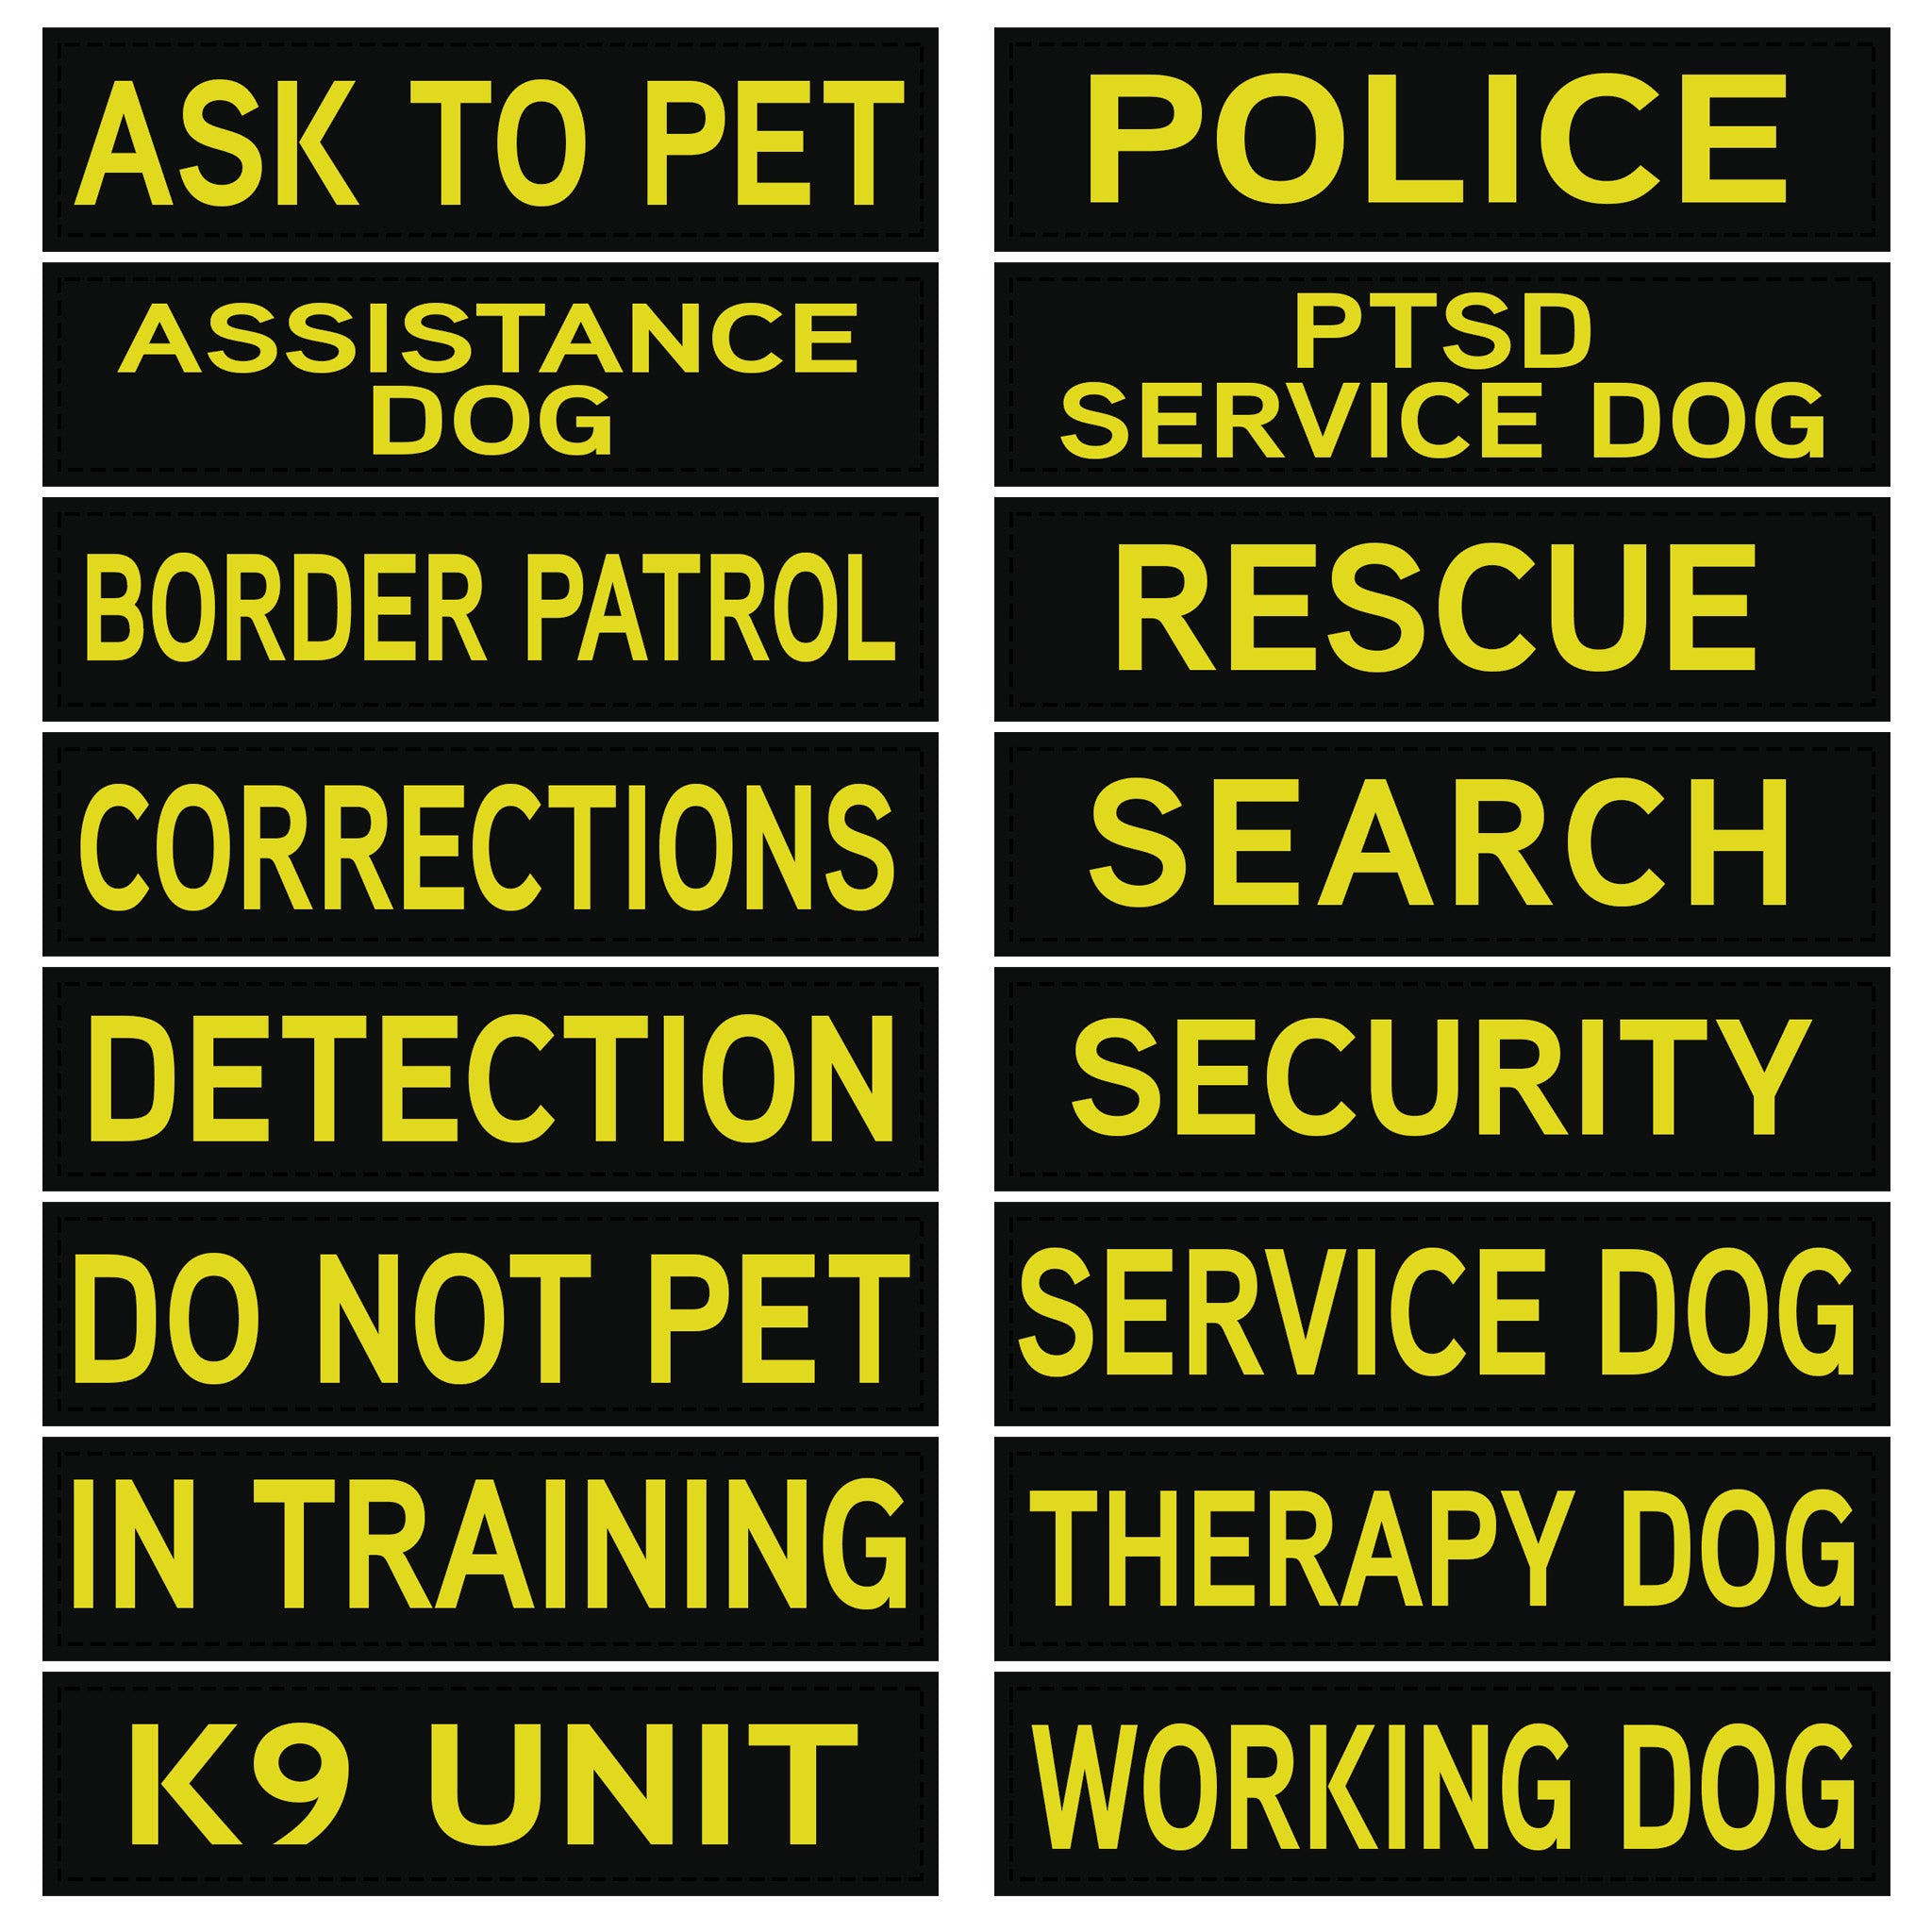 K9 Patches - The Most Professional K9 Patches Supplier